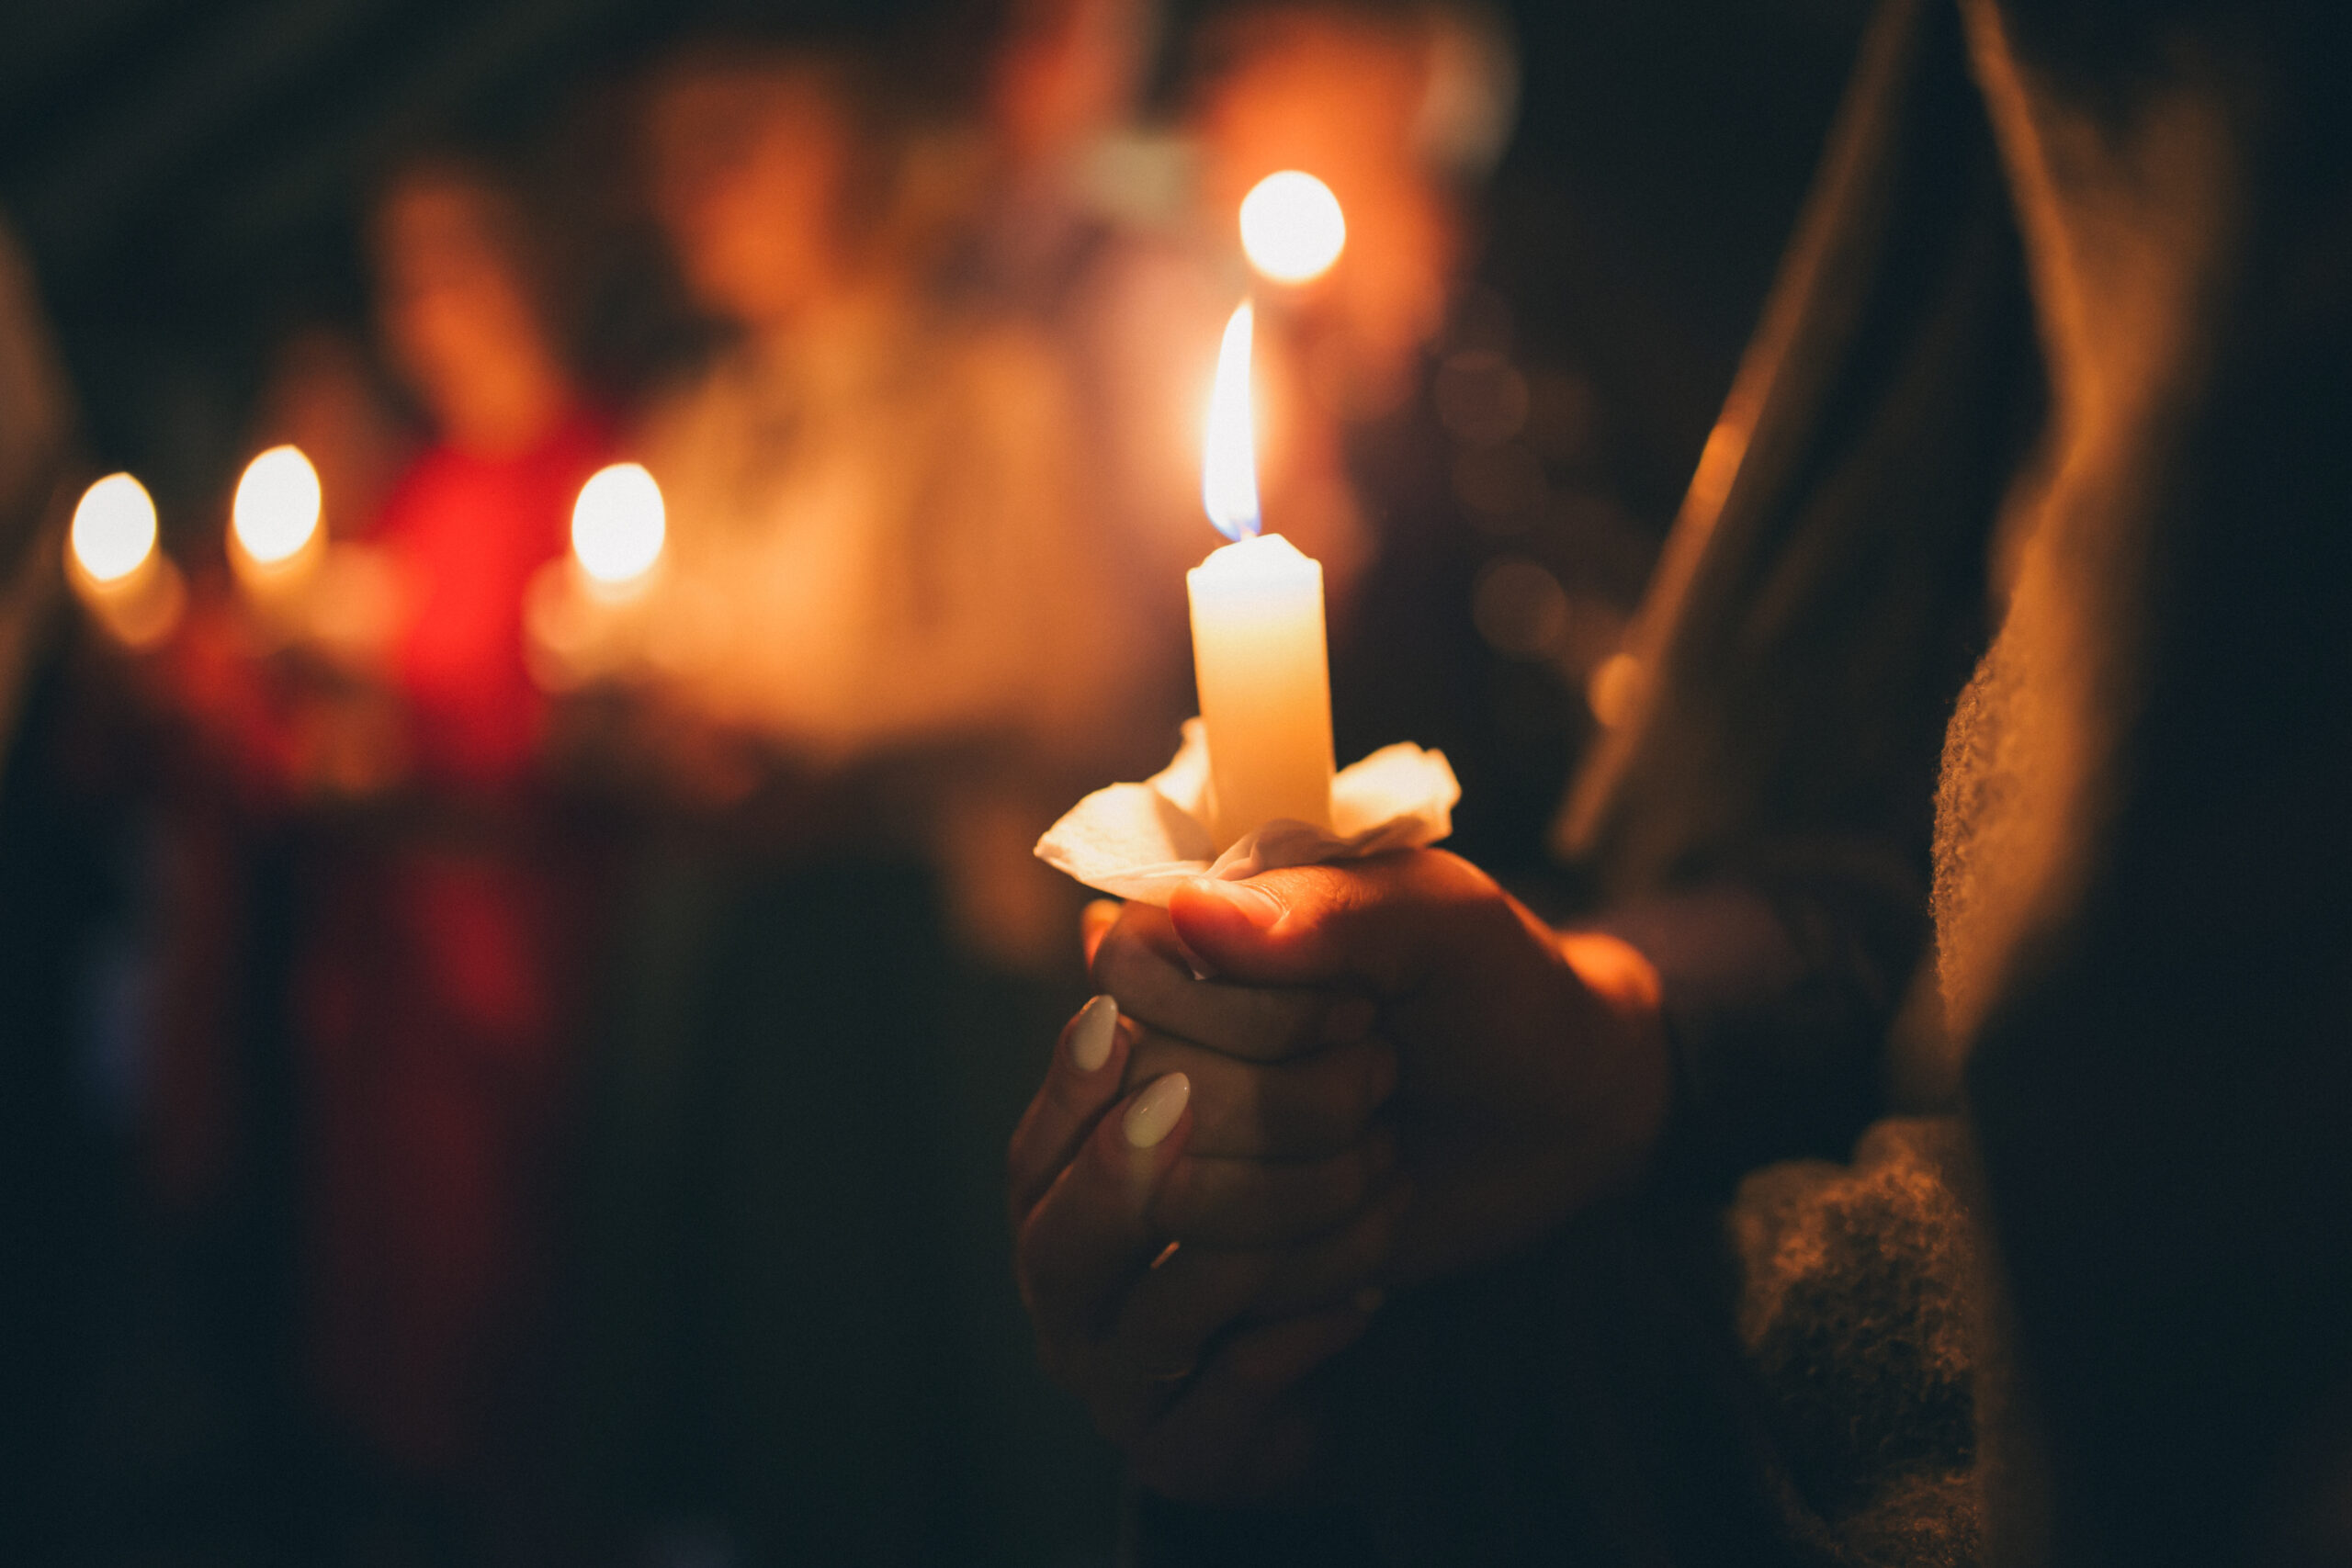 converting to catholicism - image of candles burning against dark background, hands holding lit candles